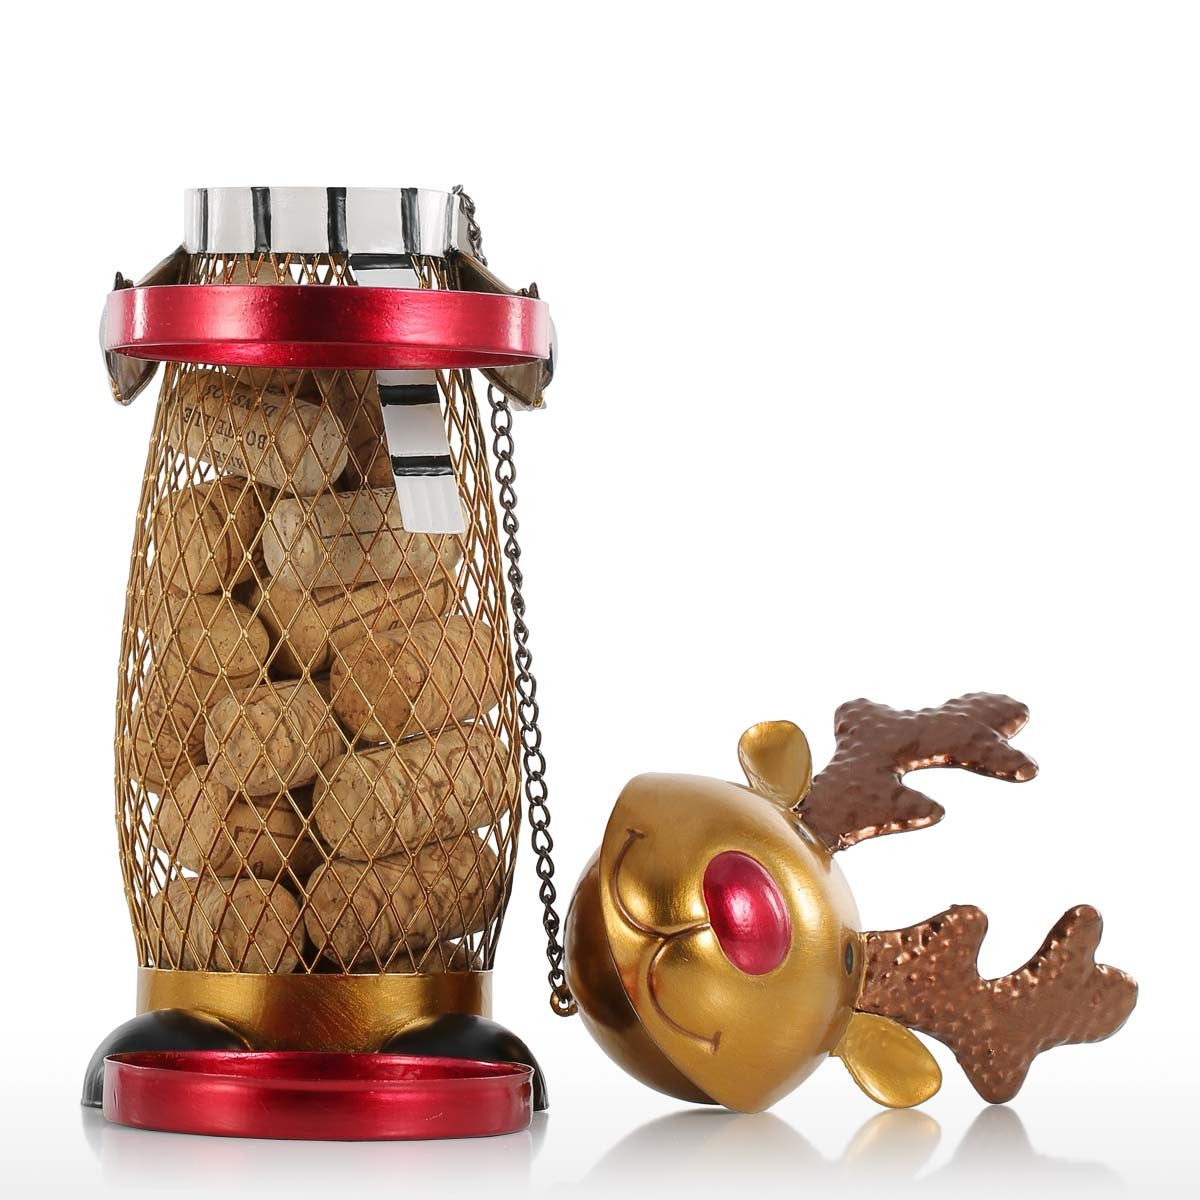 Simply the cutest reindeer wine bottle holder you'll ever see